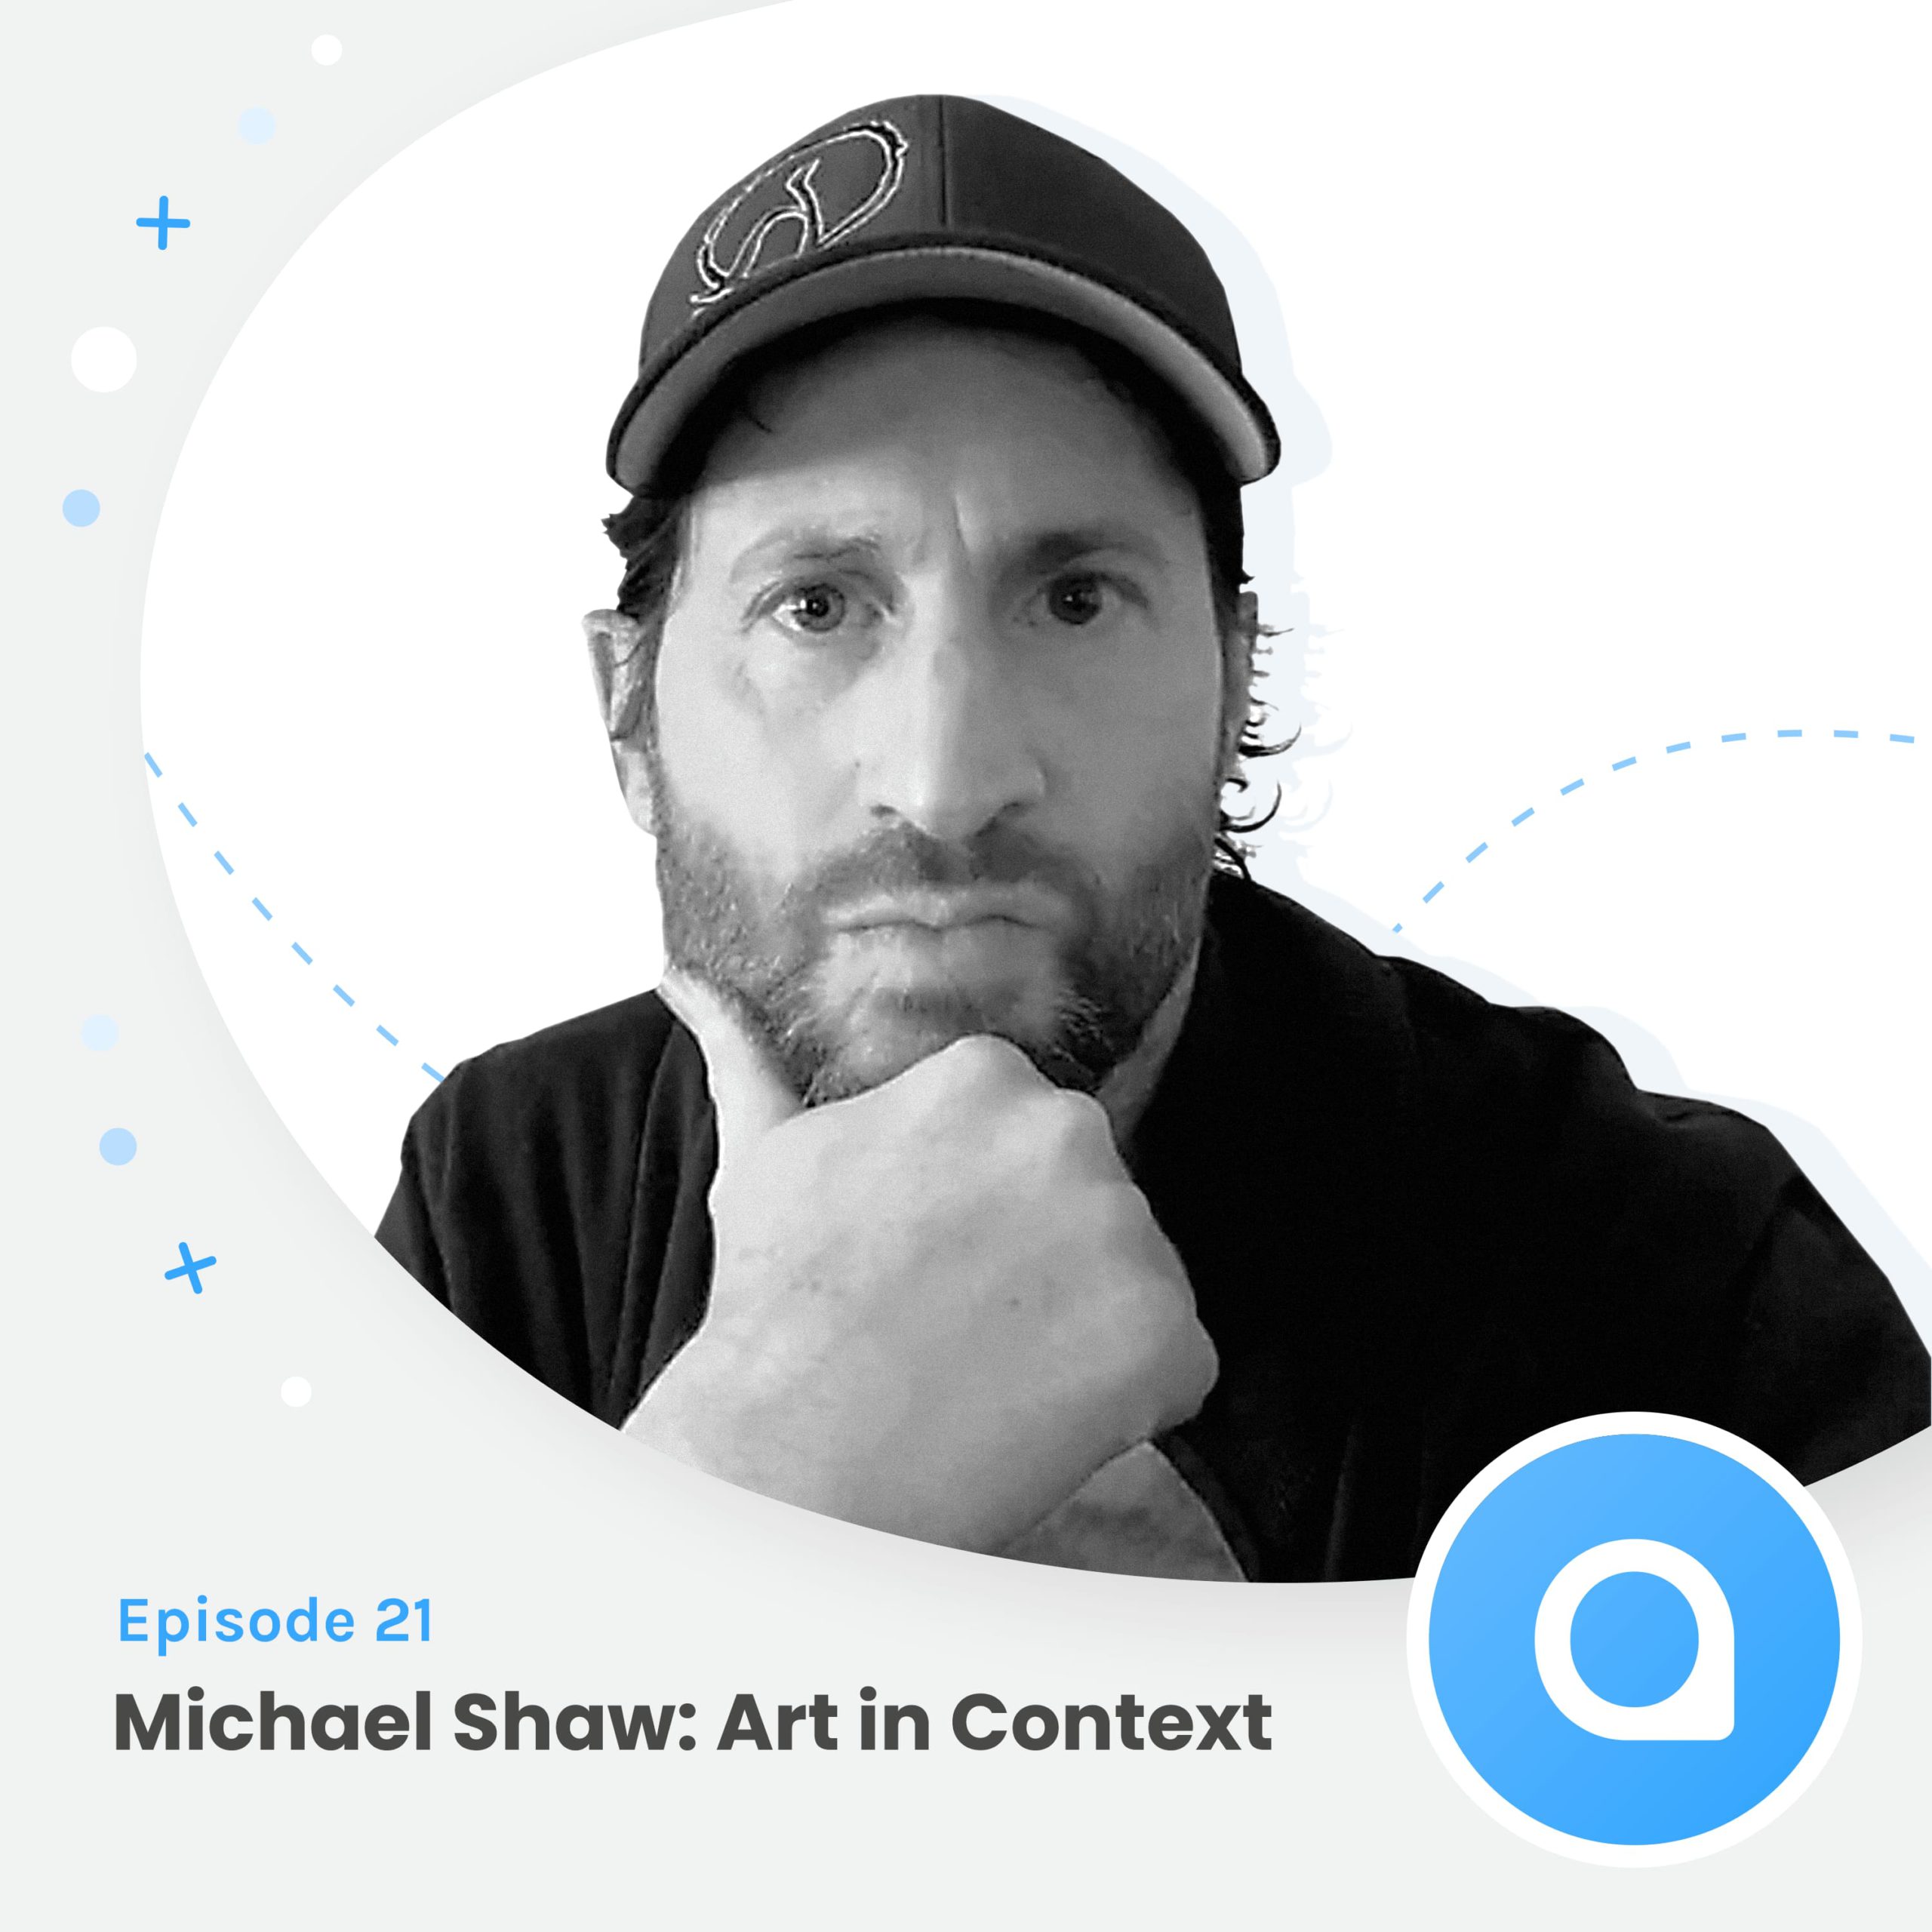 Michael Shaw: Art in Context